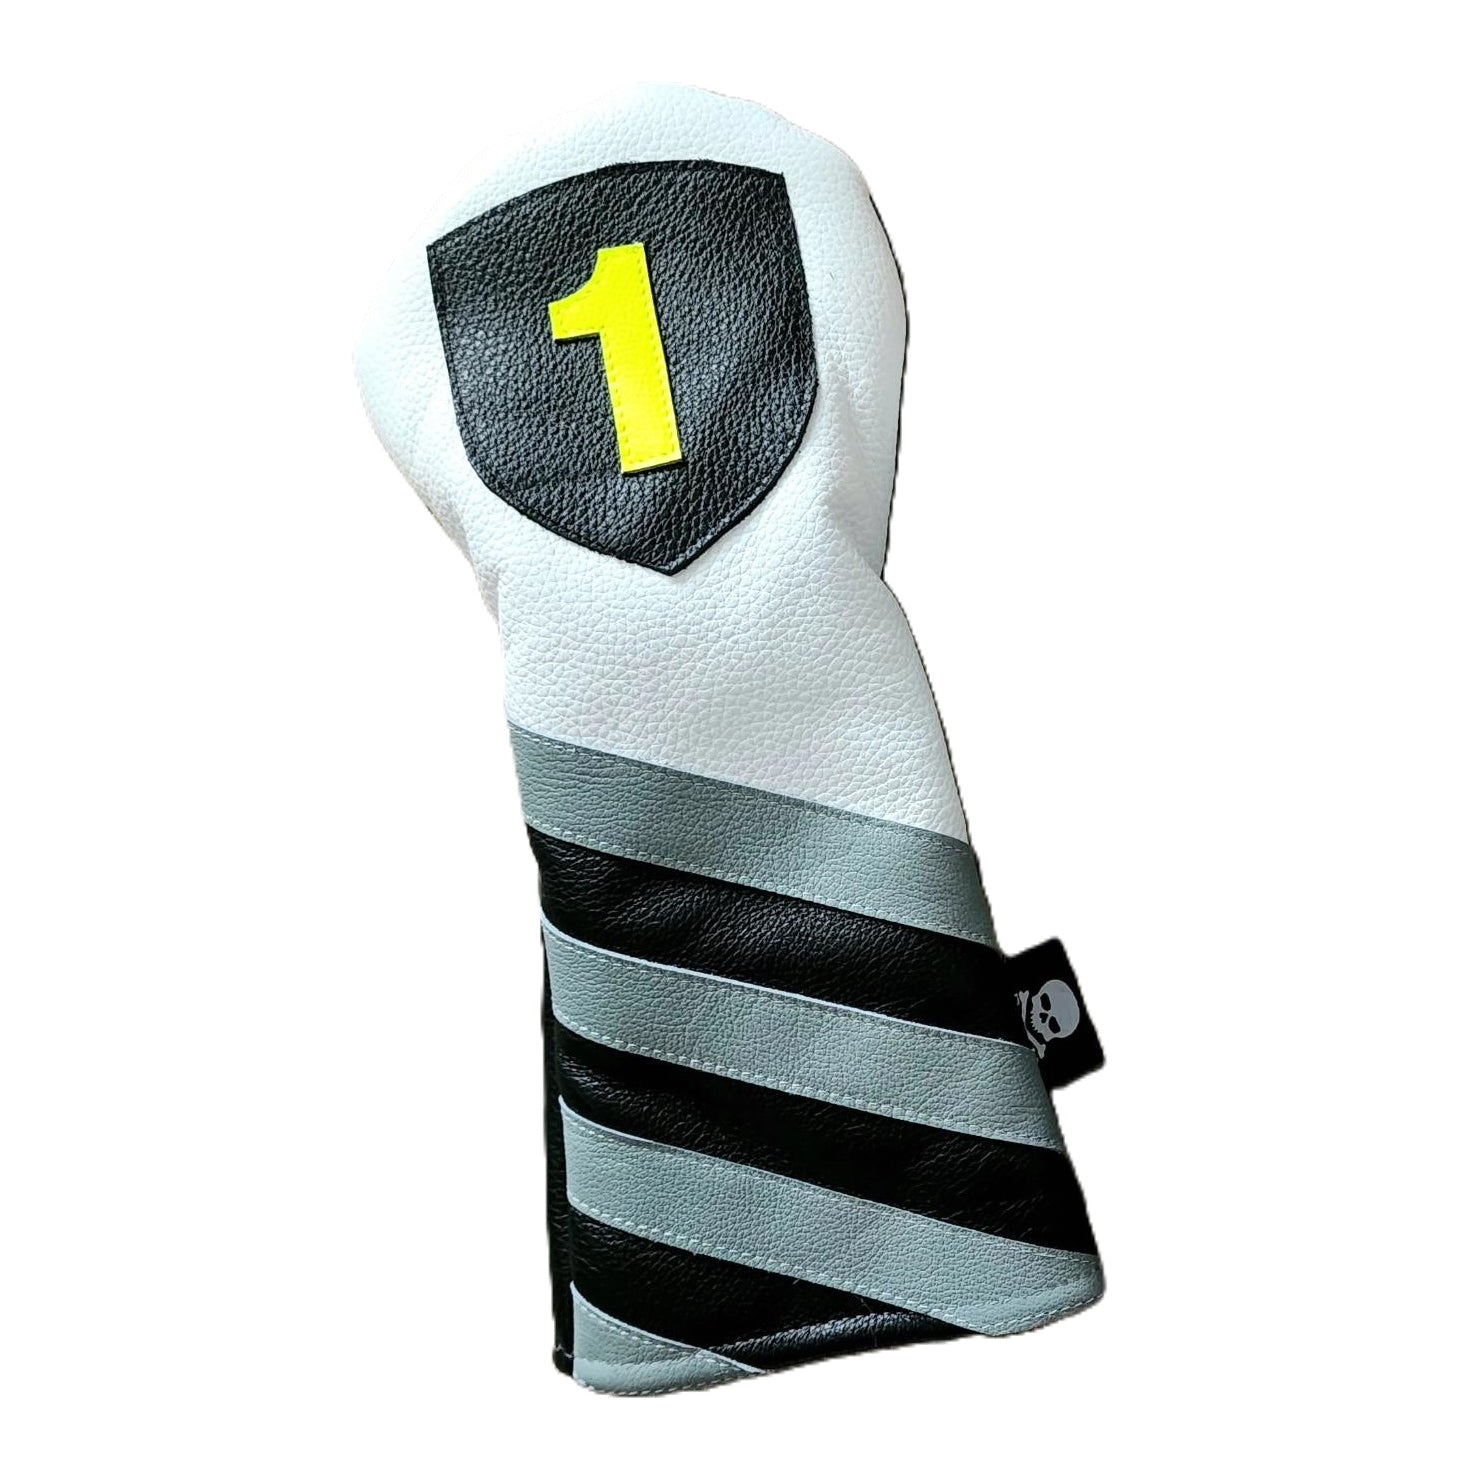 NEW! One of a Kind! Neon Badge & Diagonal Rugby Stripe Driver Headcover - Robert Mark Golf